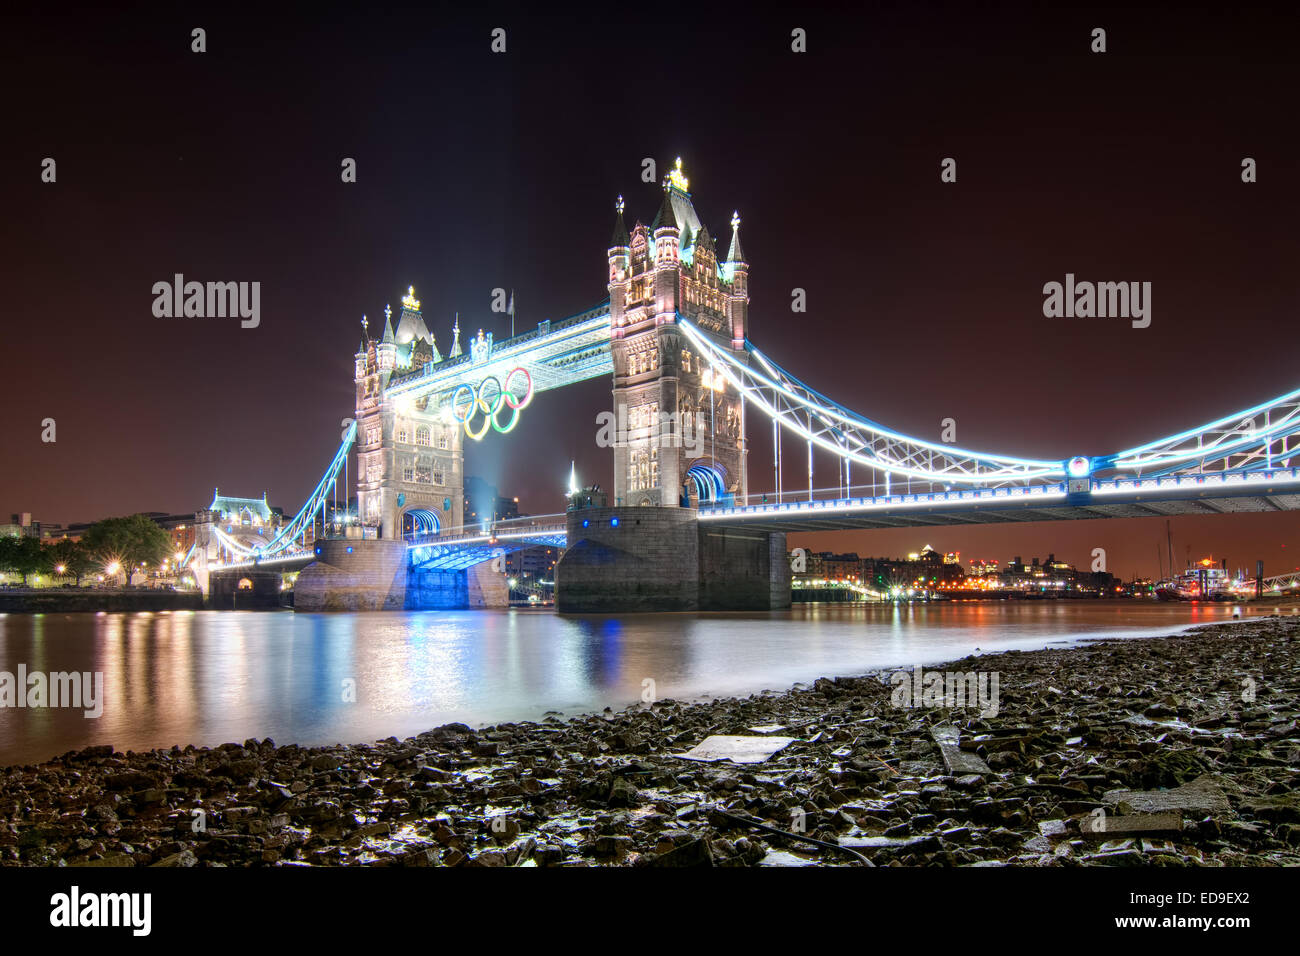 The Olympic rings are suspended from below Tower Bridge in London during the 2012 Olympics. Stock Photo